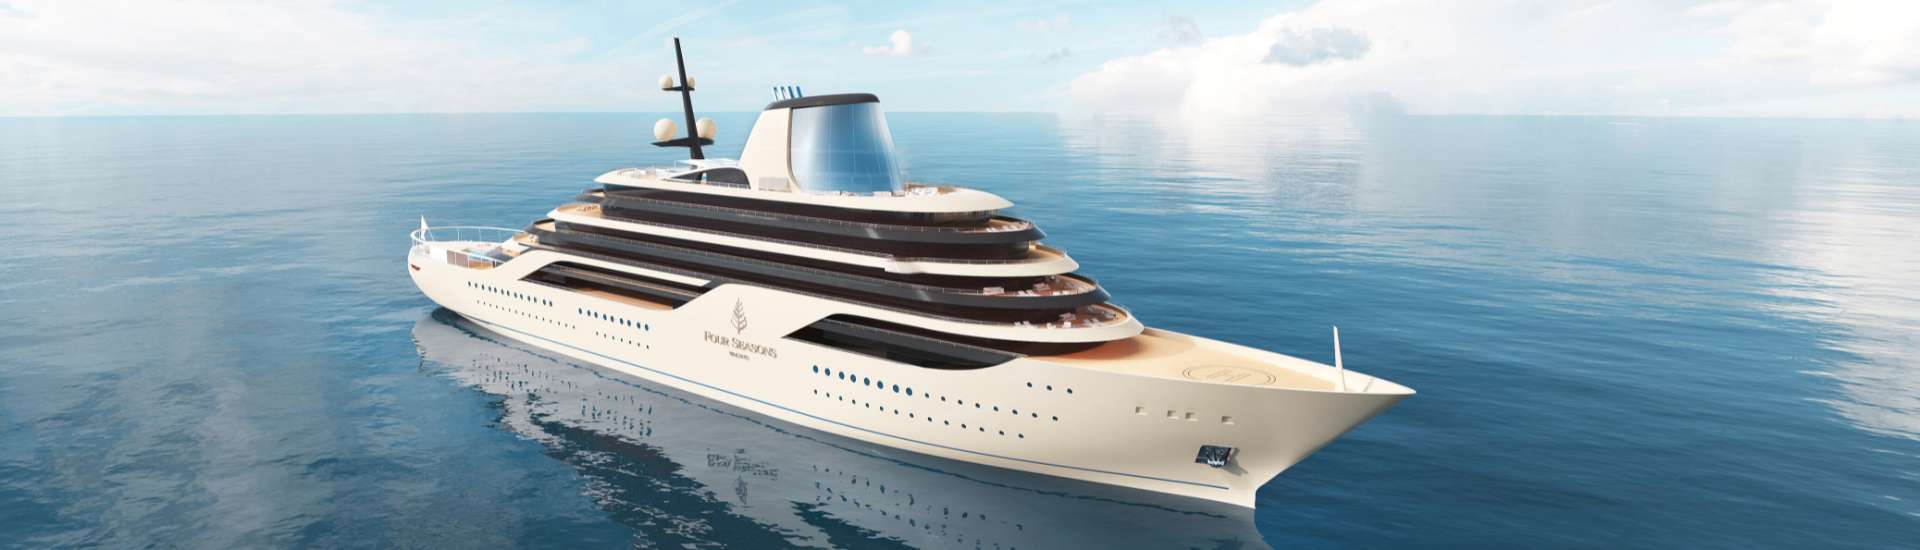 VIKAND Partners with Marc-Henry Cruise Holdings LTD, Joint Owner/Operator of Four Seasons Yachts (Image at LateCruiseNews.com - February 2023)